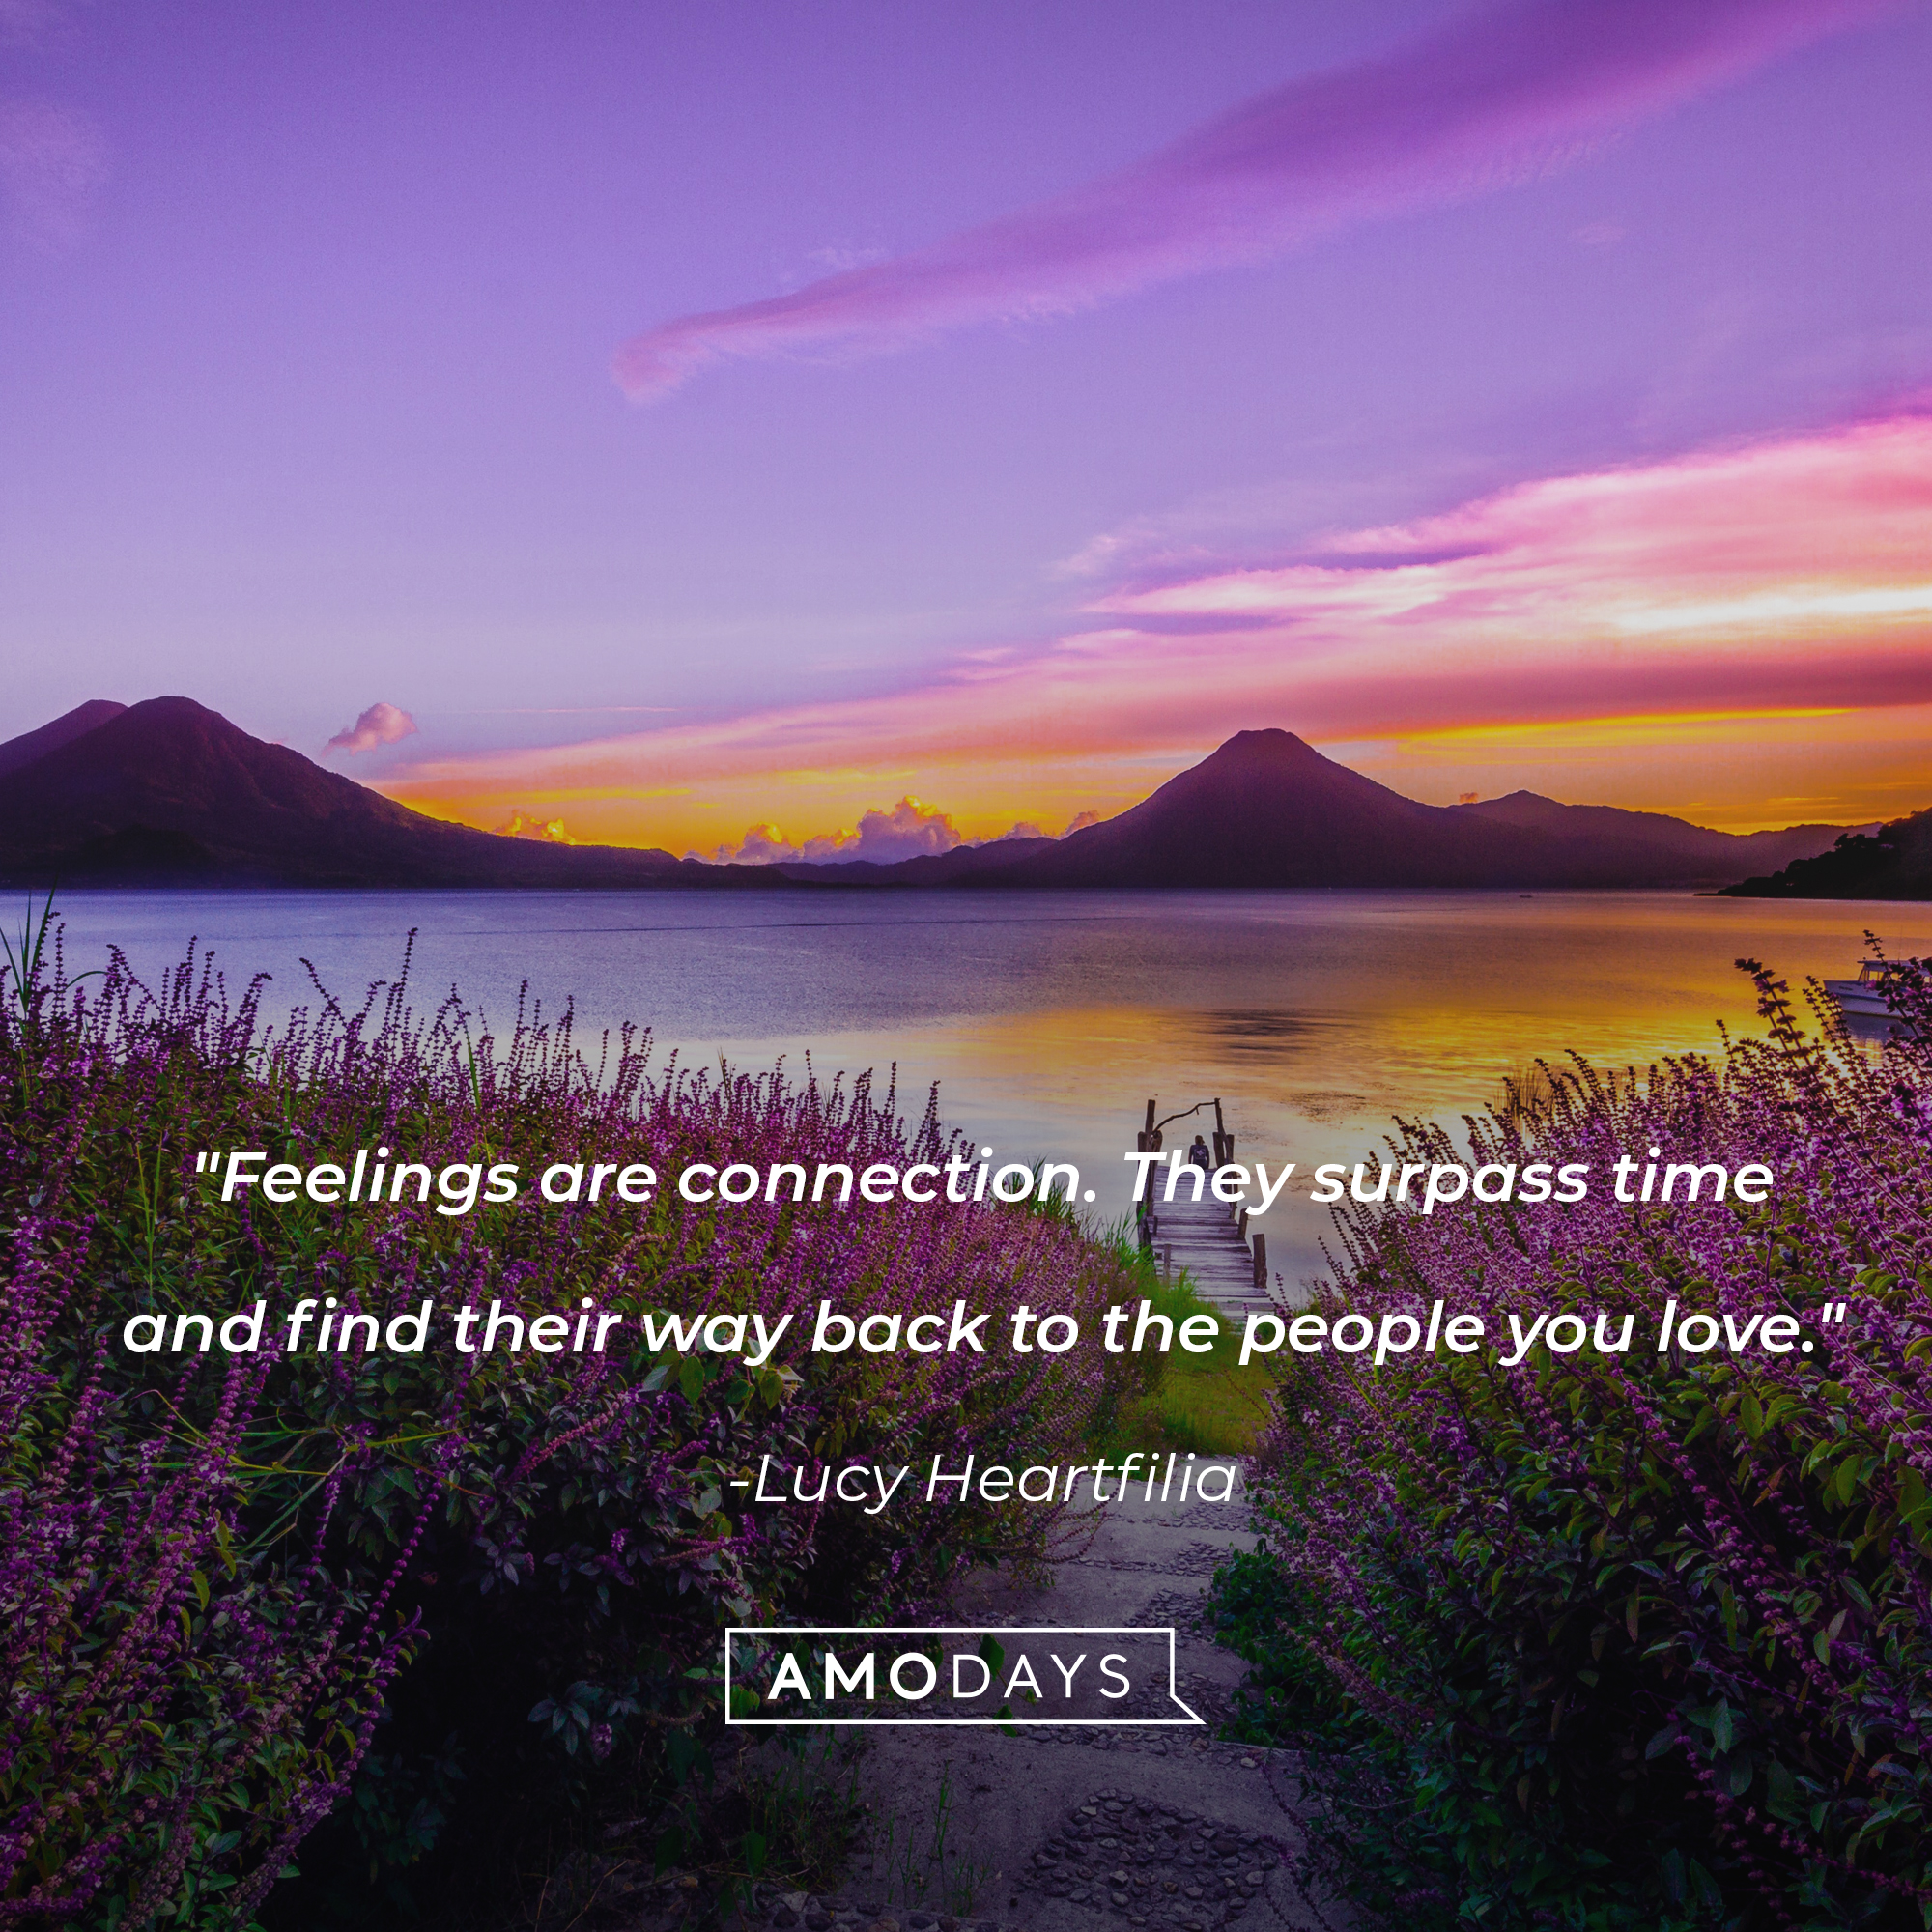 Lucy Heartfilia's quote: "Feelings are connection. They surpass time and find their way back to the people you love." | Image: Unsplash